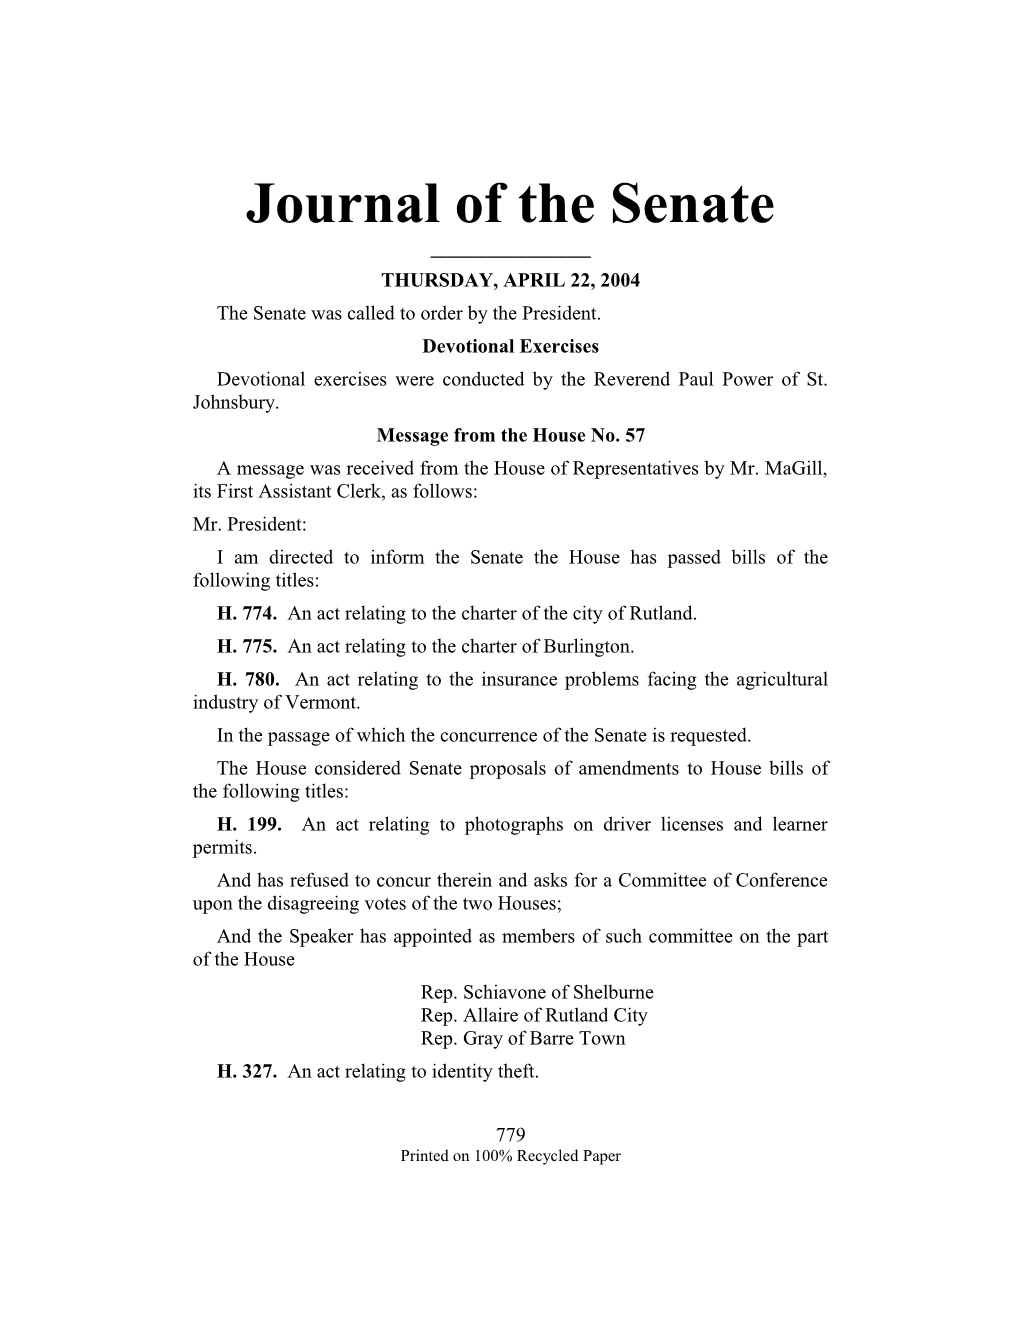 The Senate Was Called to Order by the President s3